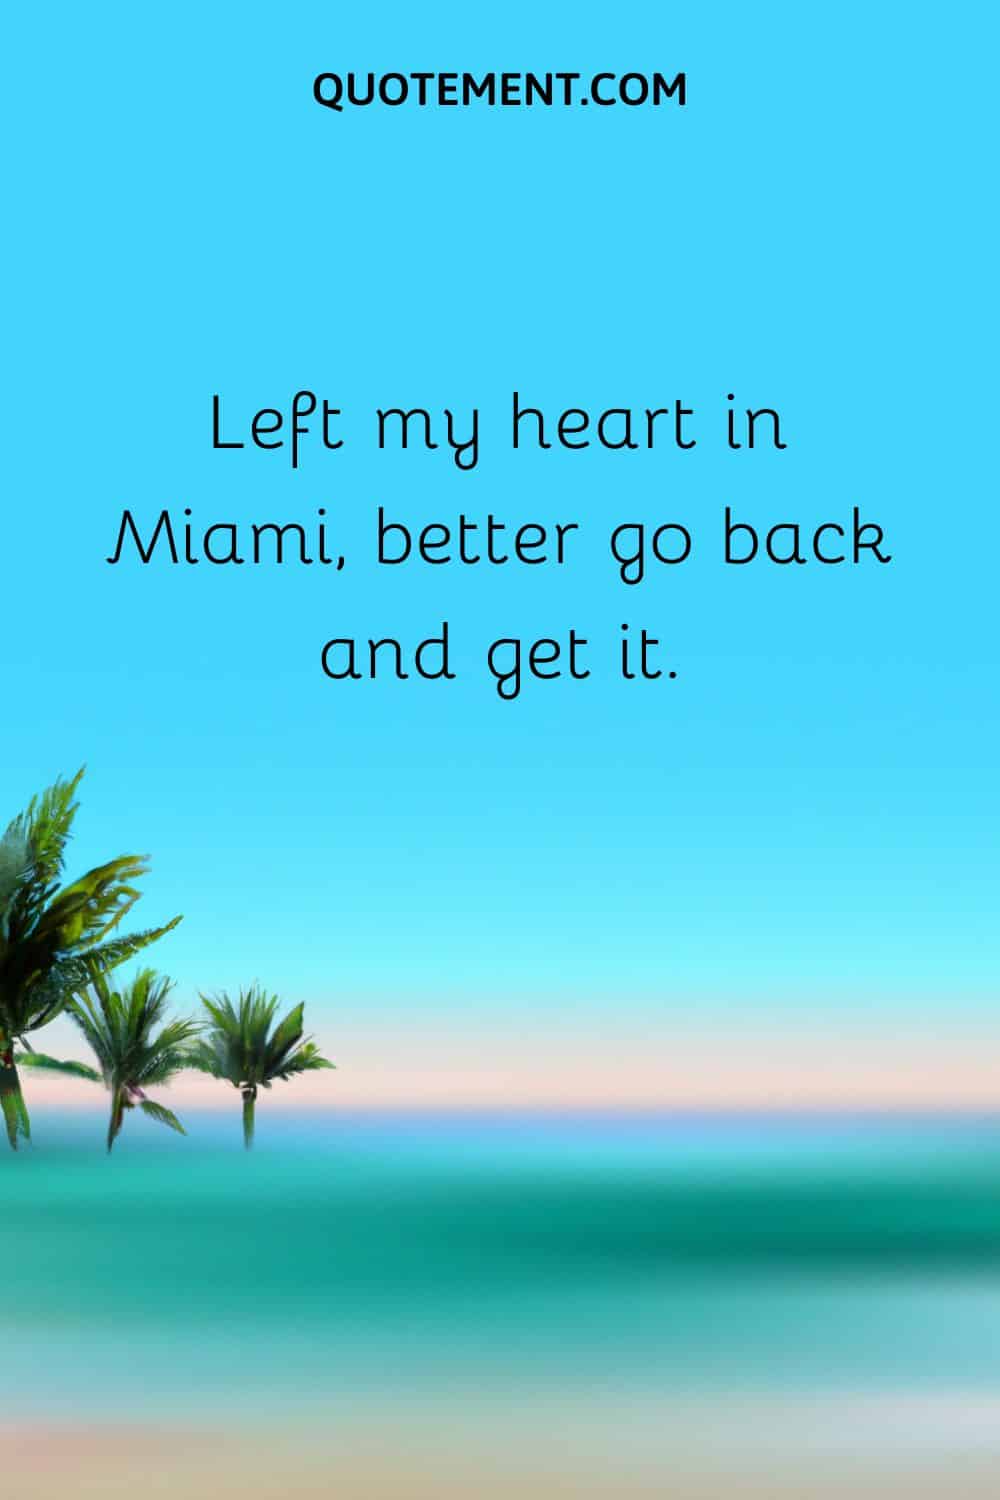 Left my heart in Miami, better go back and get it